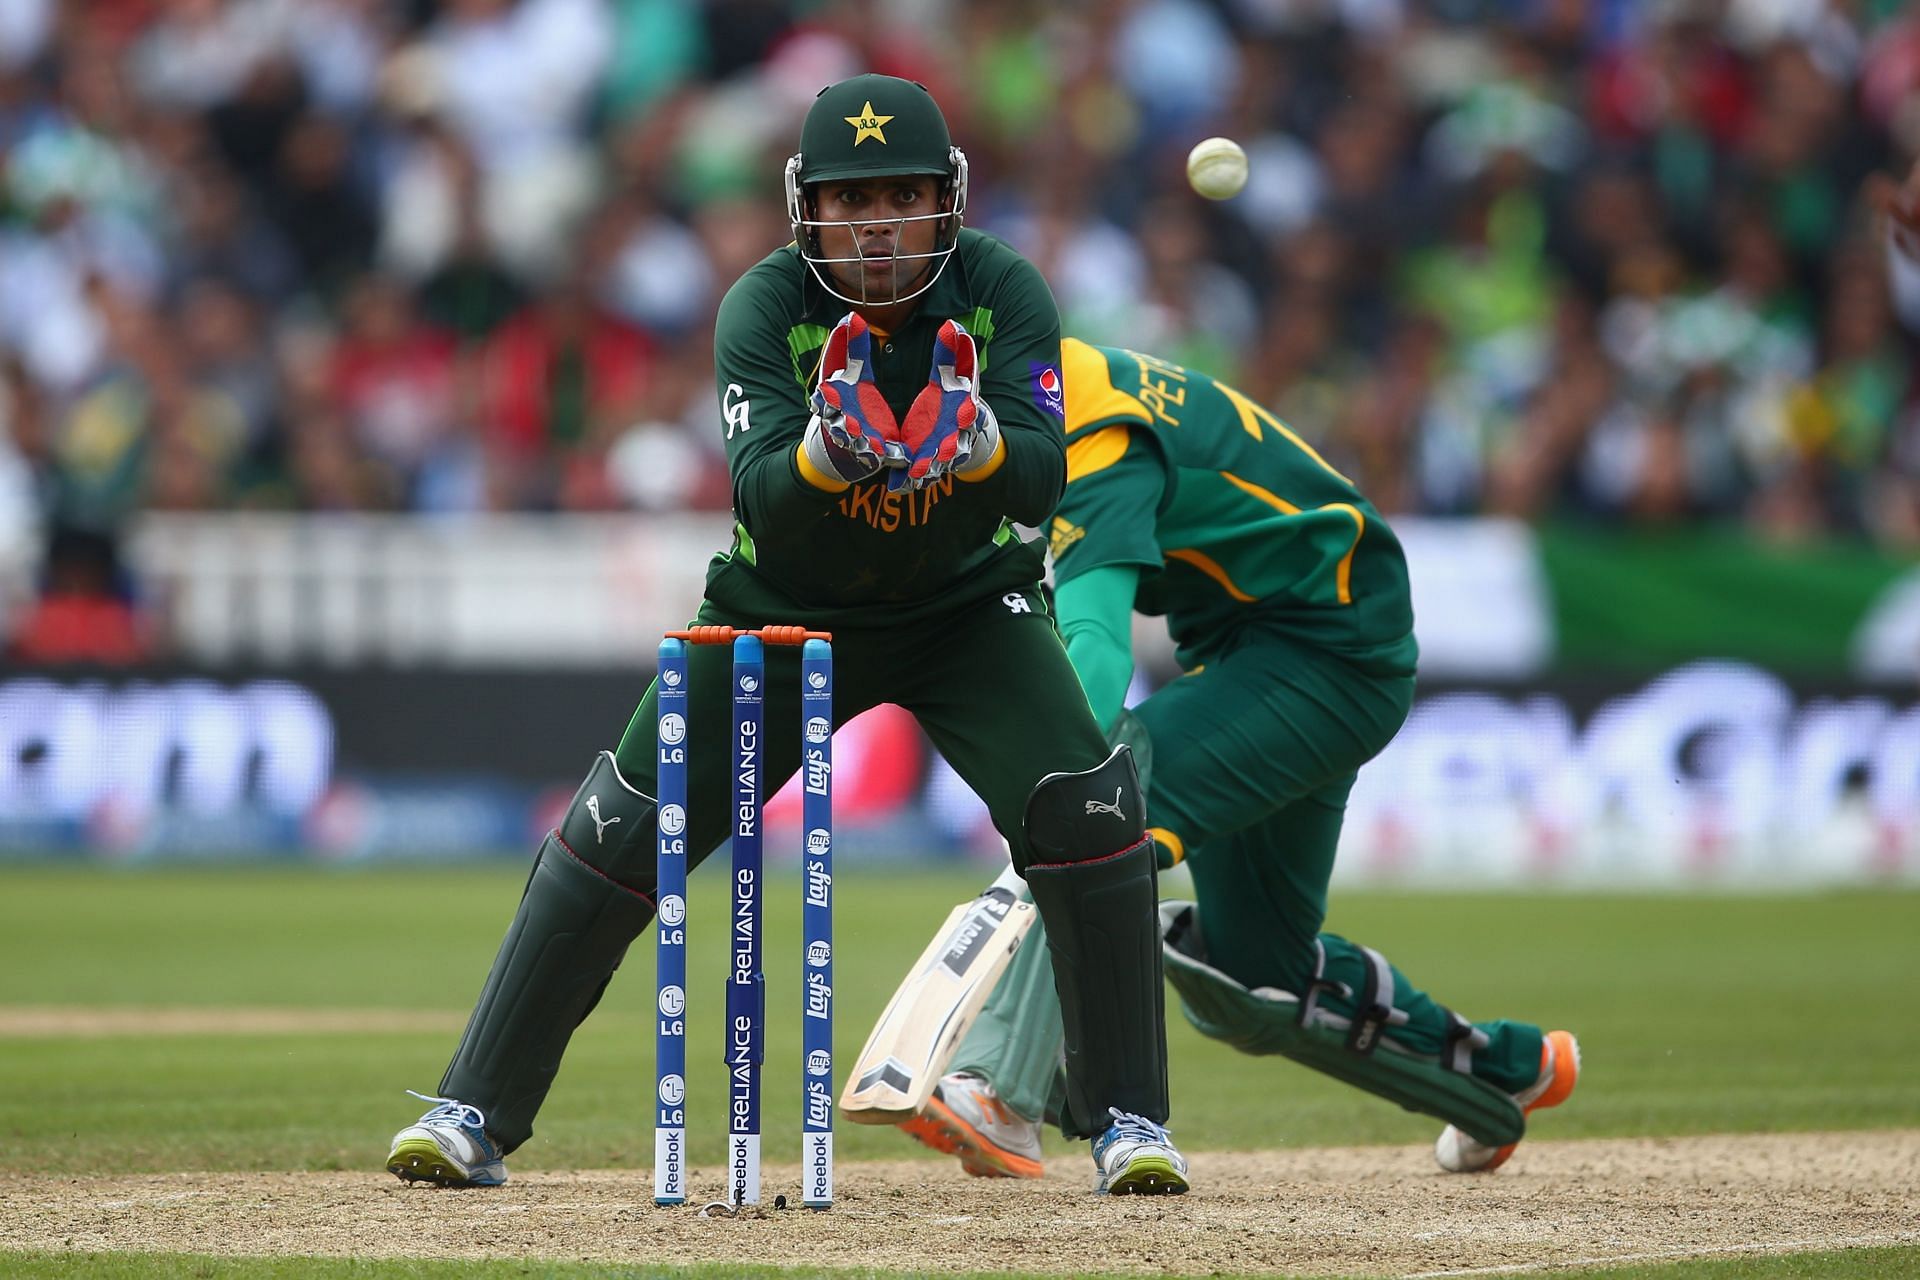 Kamran has represented the Pakistan cricket team in all three formats